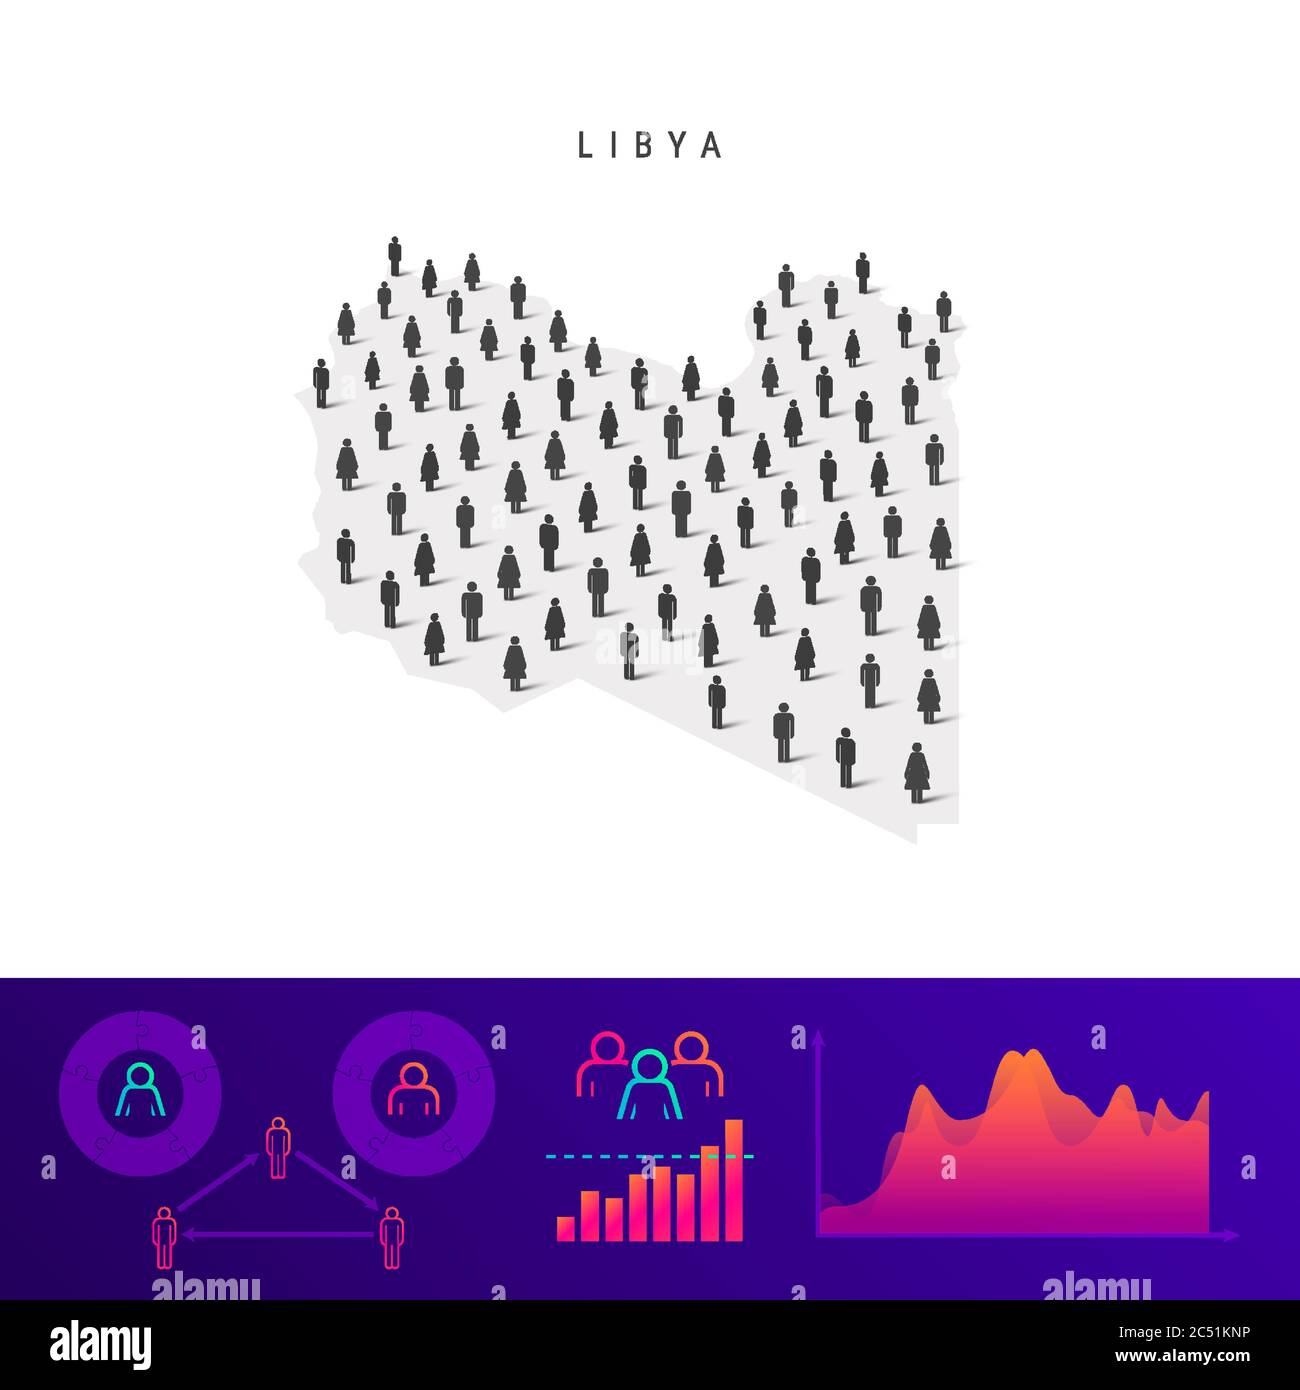 Libya people map. Detailed vector silhouette. Mixed crowd of men and women icons. Population infographic elements. Vector illustration isolated on whi Stock Vector